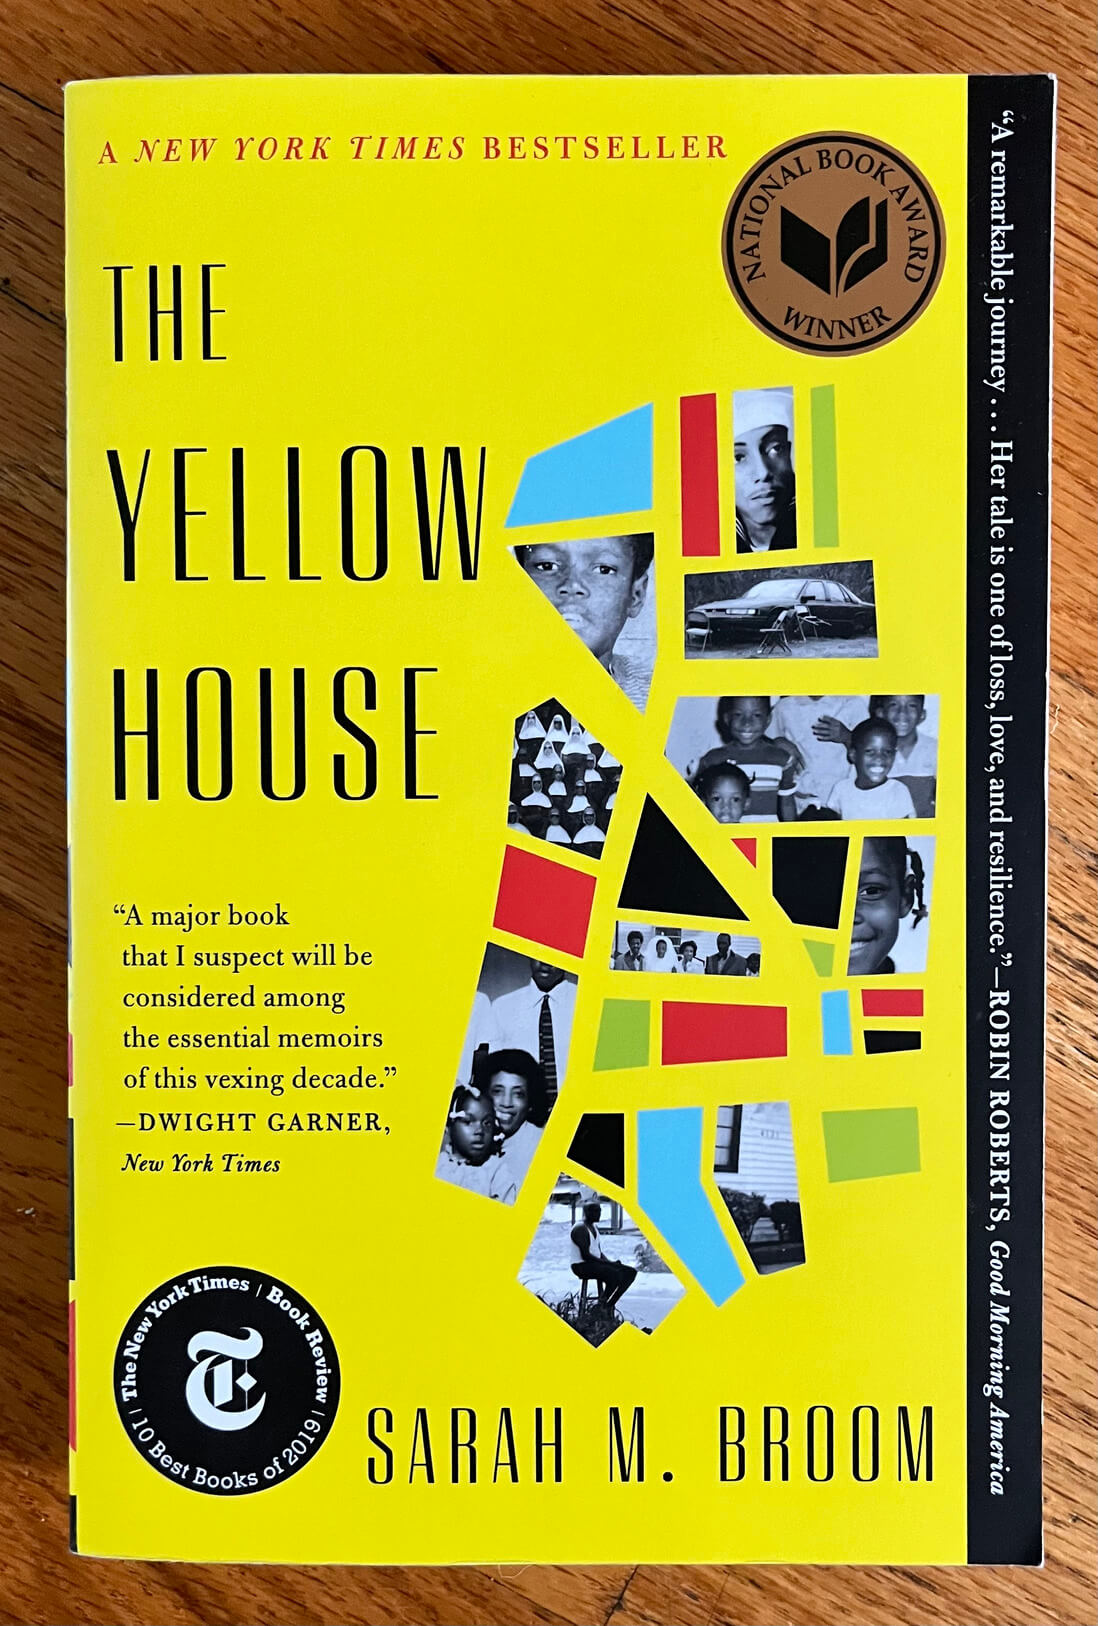 “The Yellow House” by Sarah M. Broom